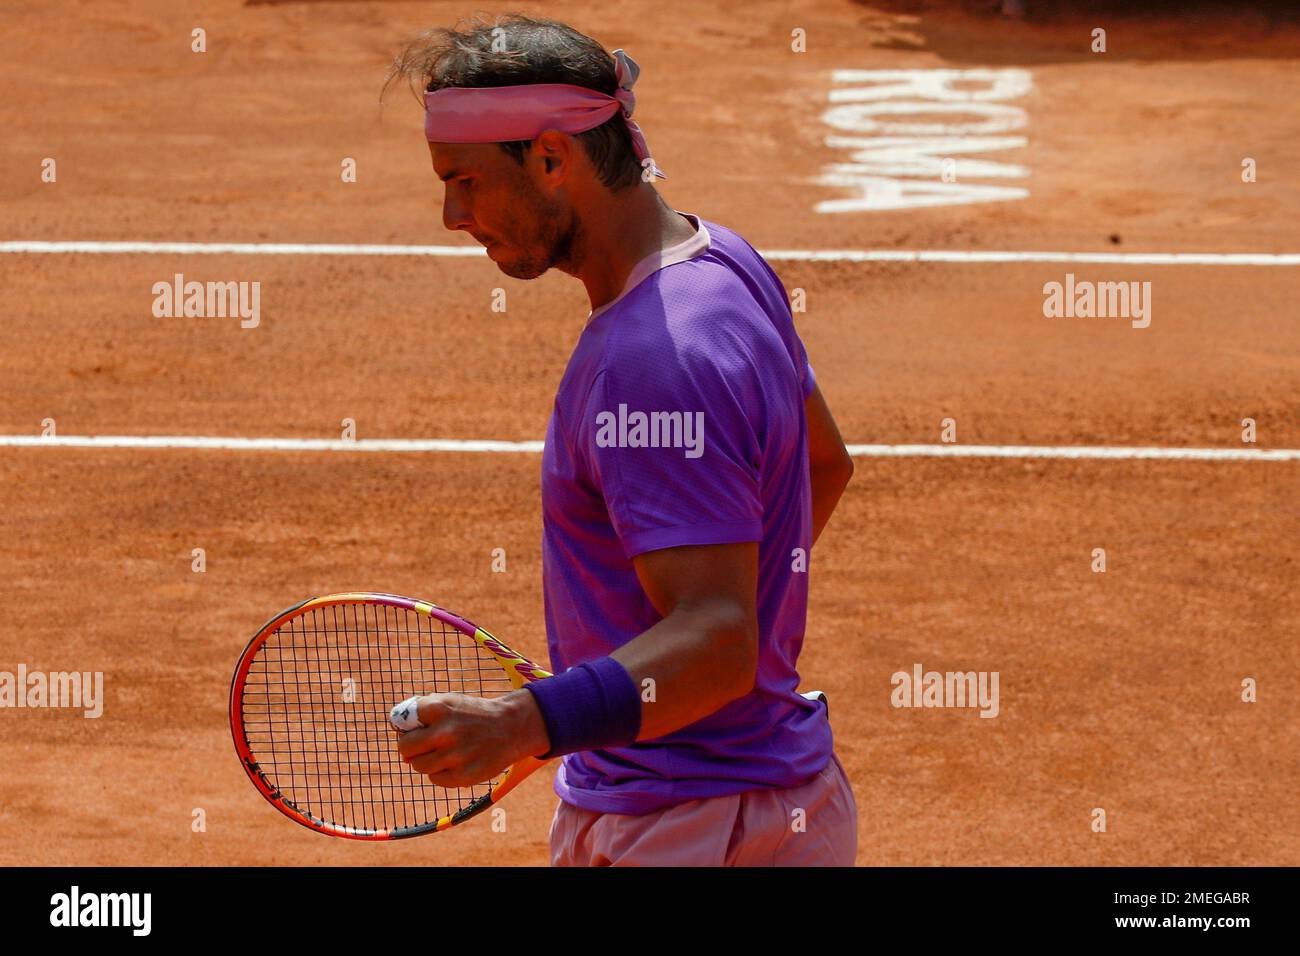 Spains Rafael Nadal looks down as he plays Canadas Denis Shapovalov, during their 3rd round match at the Italian Open tennis tournament, in Rome, Thursday, May 13, 2021